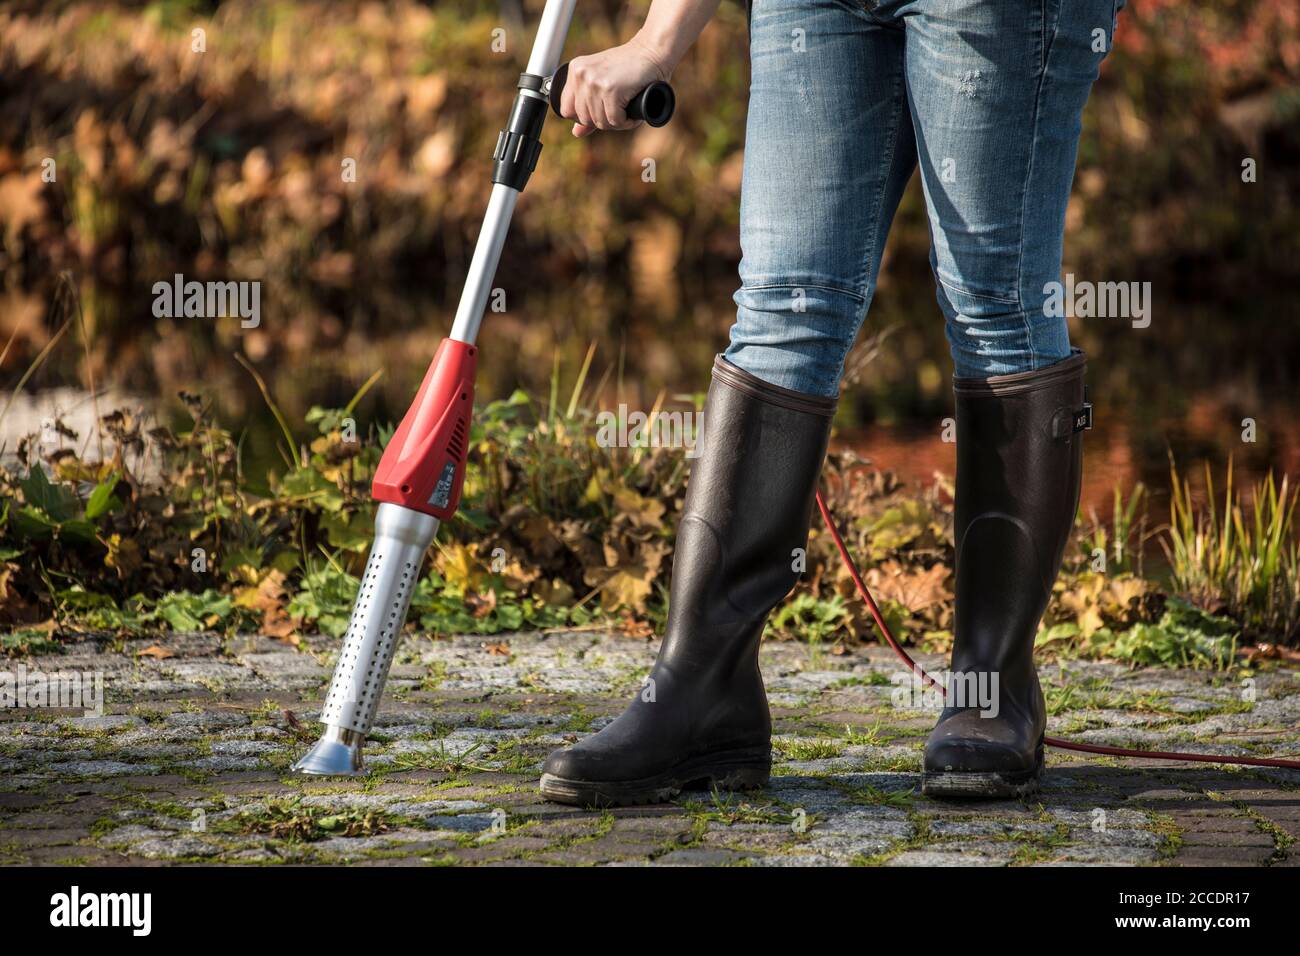 Thermo weed killer used for gardening Stock Photo